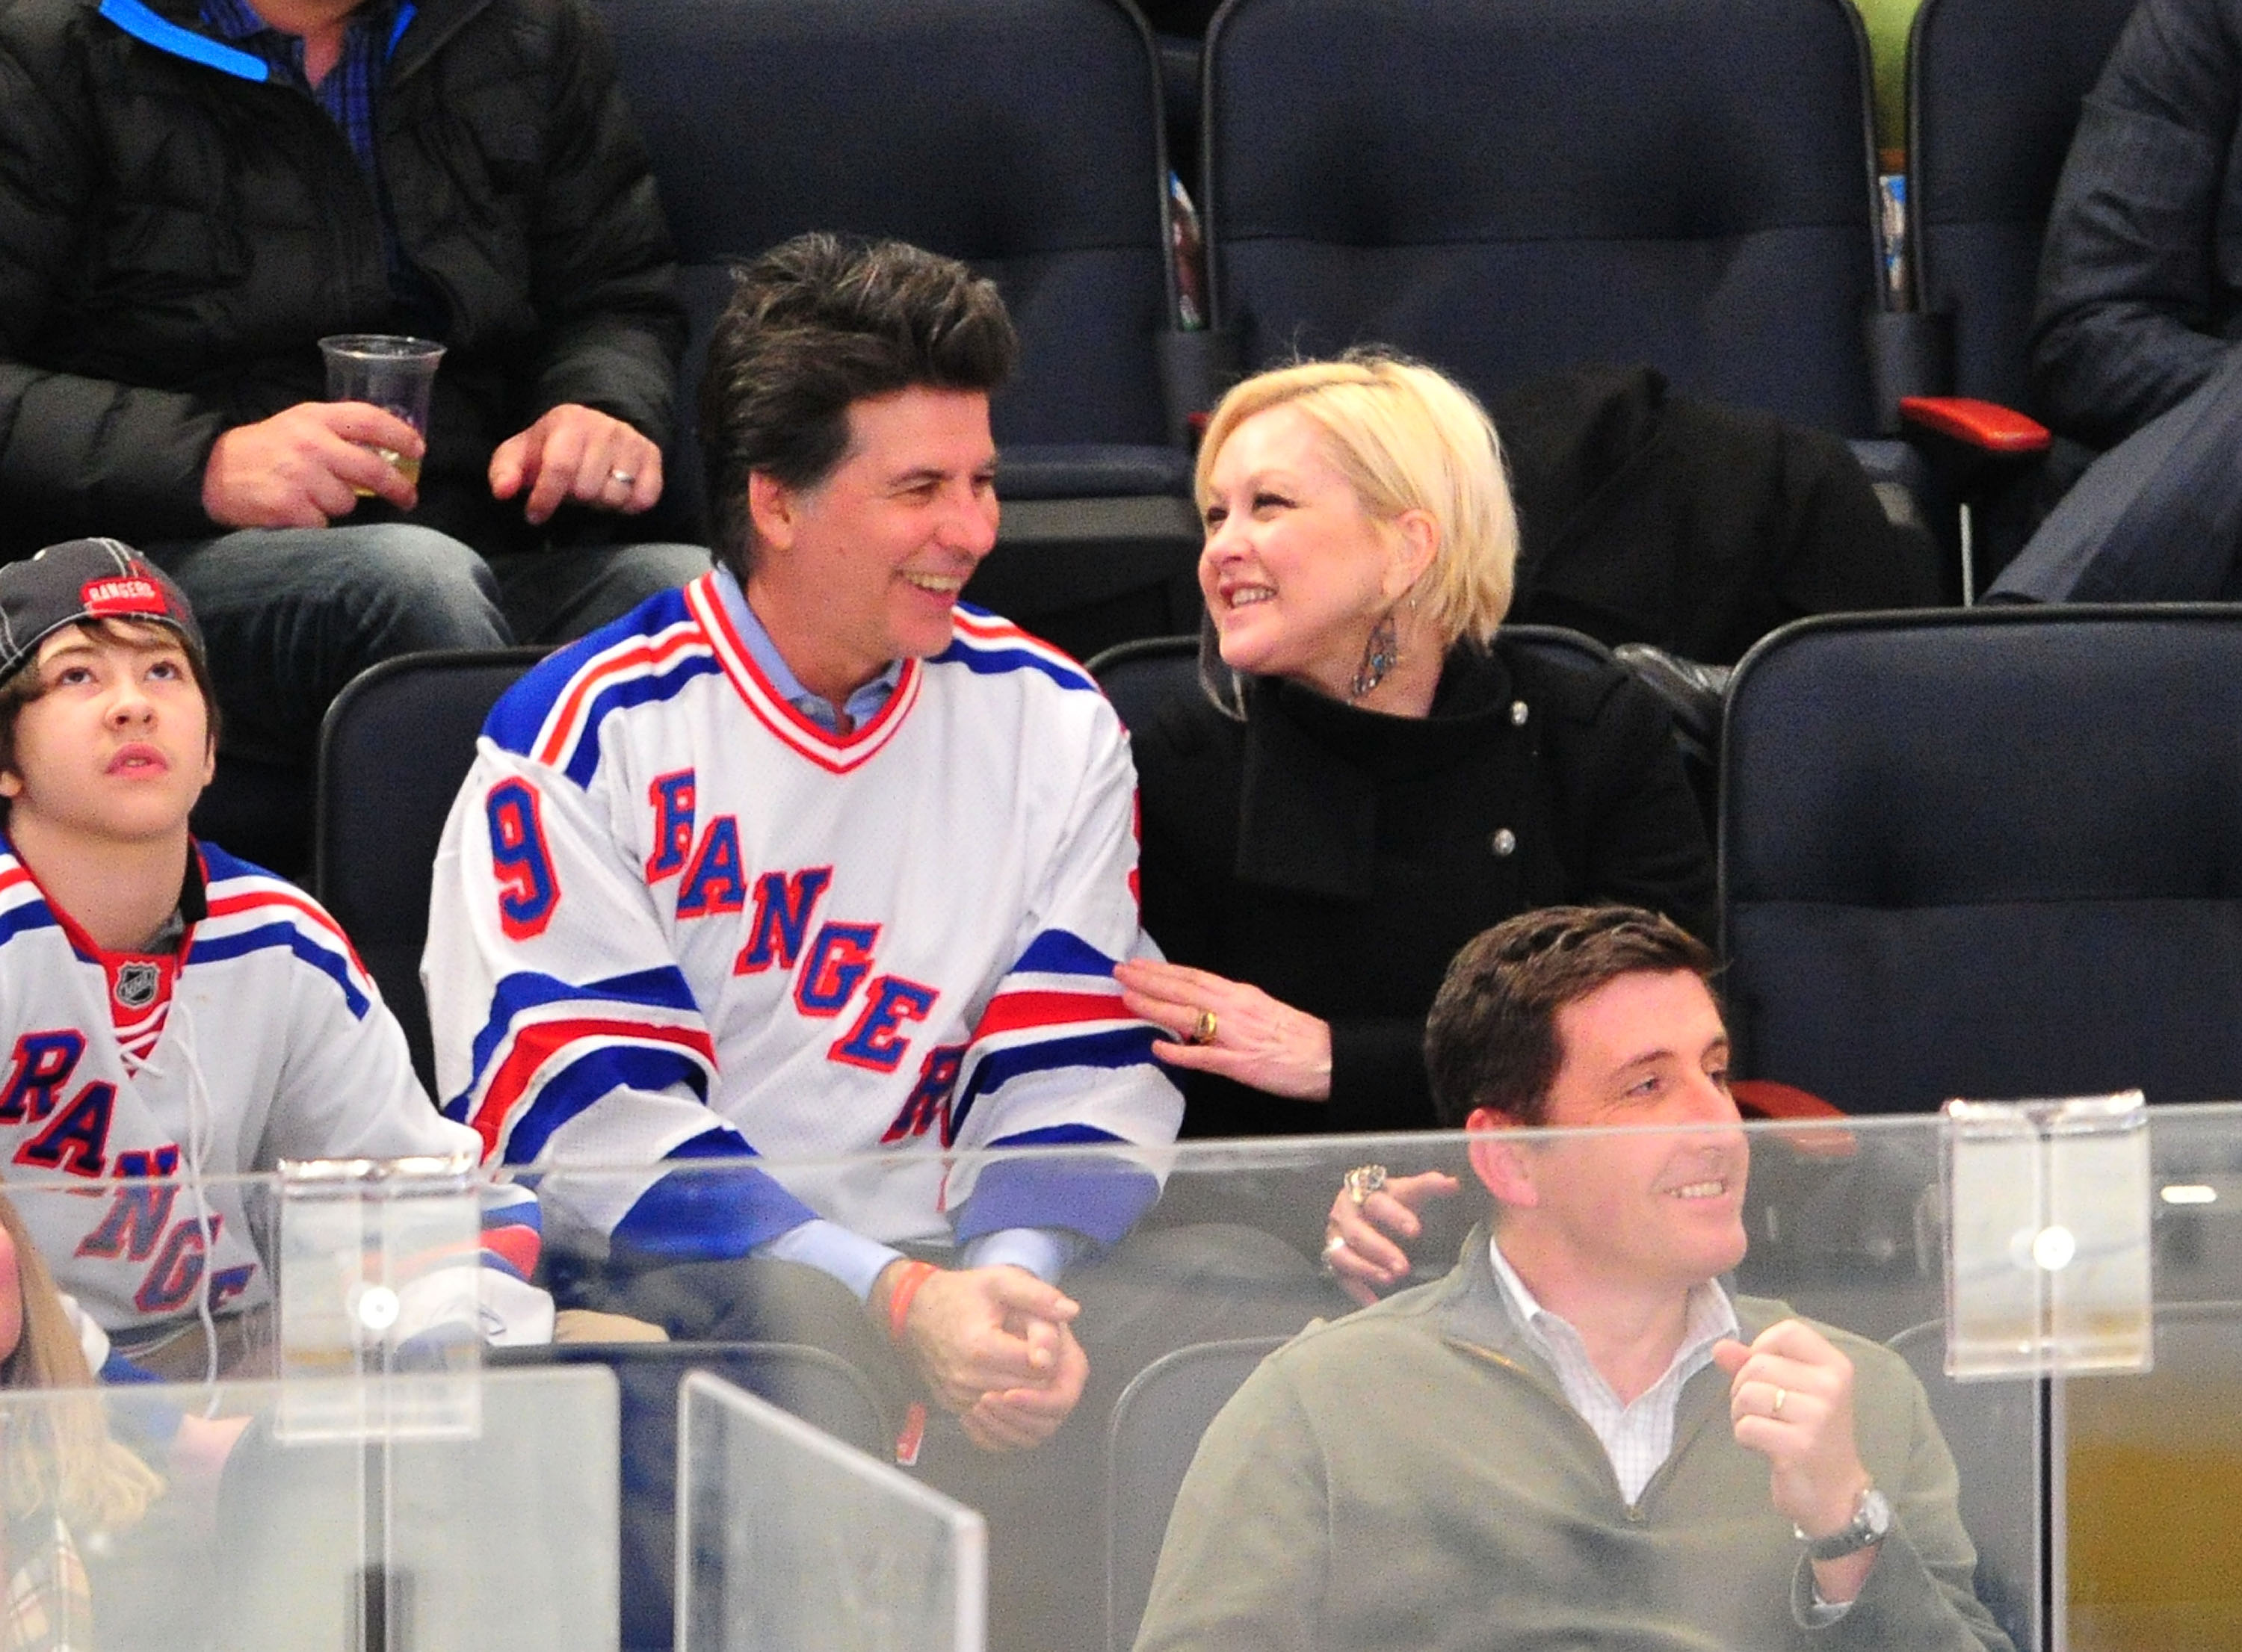 Declyn Wallace Thornton Lauper, David Thornton, and Cyndi Lauper at a game at Madison Square Garden on December 23, 2011, in New York City | Source: Getty Images